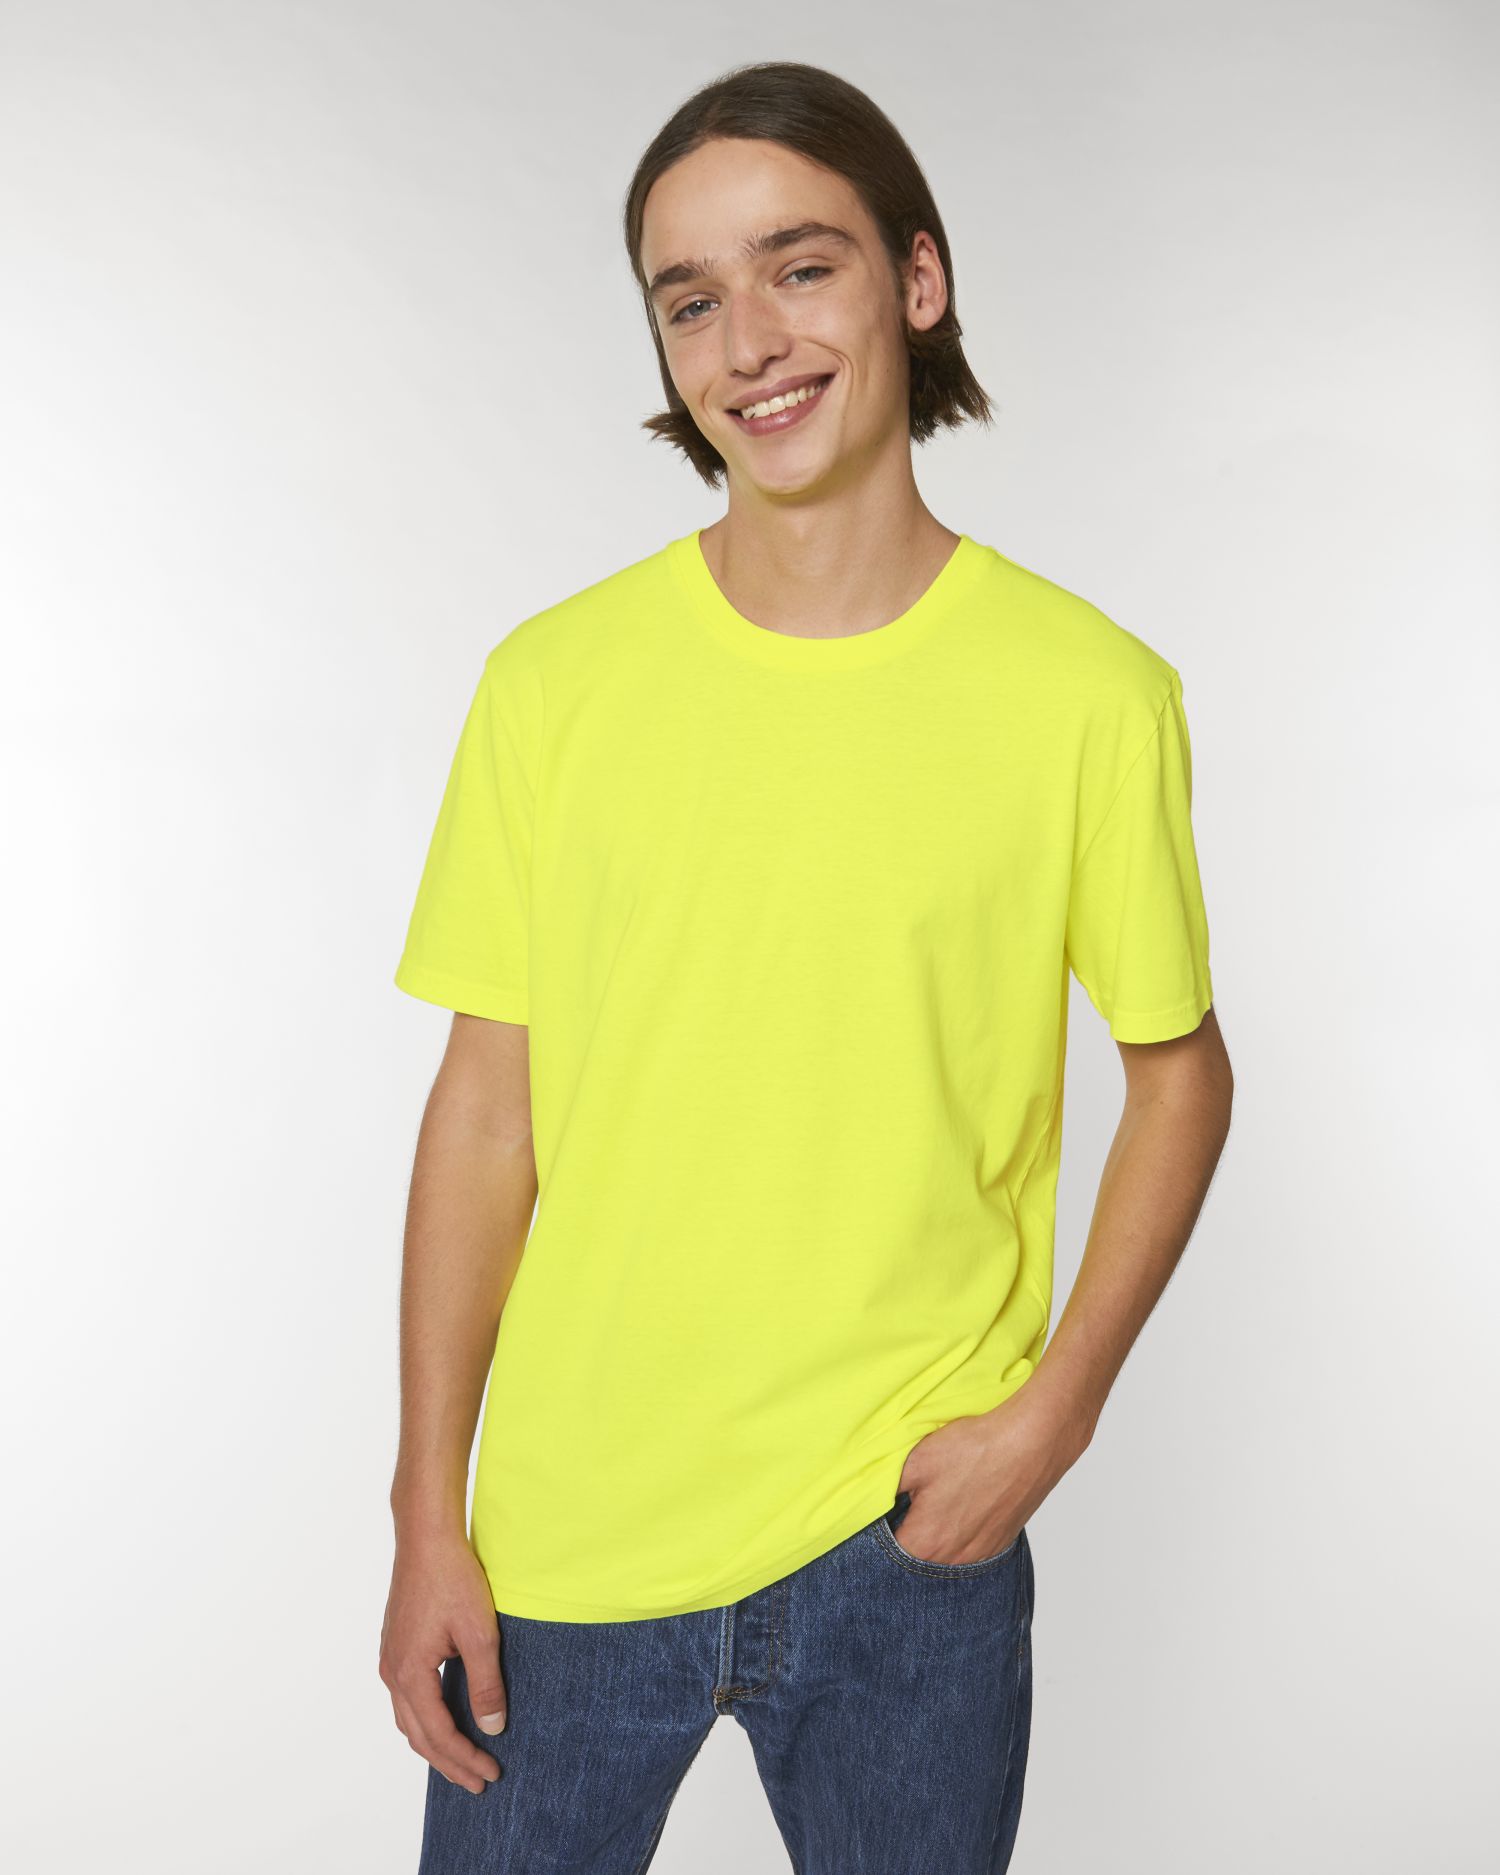 T-Shirt Creator Vintage in Farbe G. Dyed Fluo Lemonade Fizz